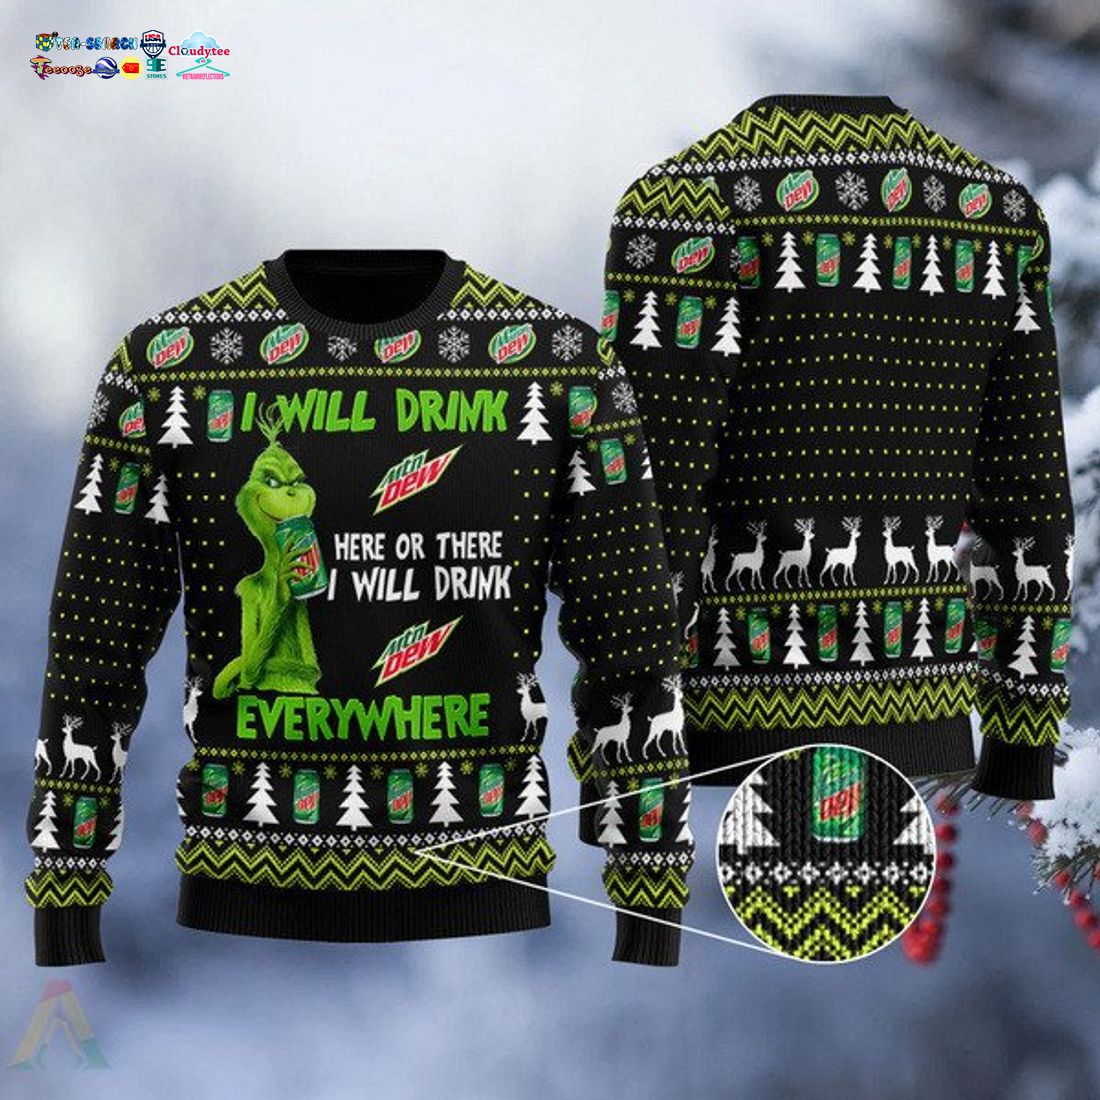 grinch-i-will-drink-mountain-dew-everywhere-ugly-christmas-sweater-1-UdRS6.jpg